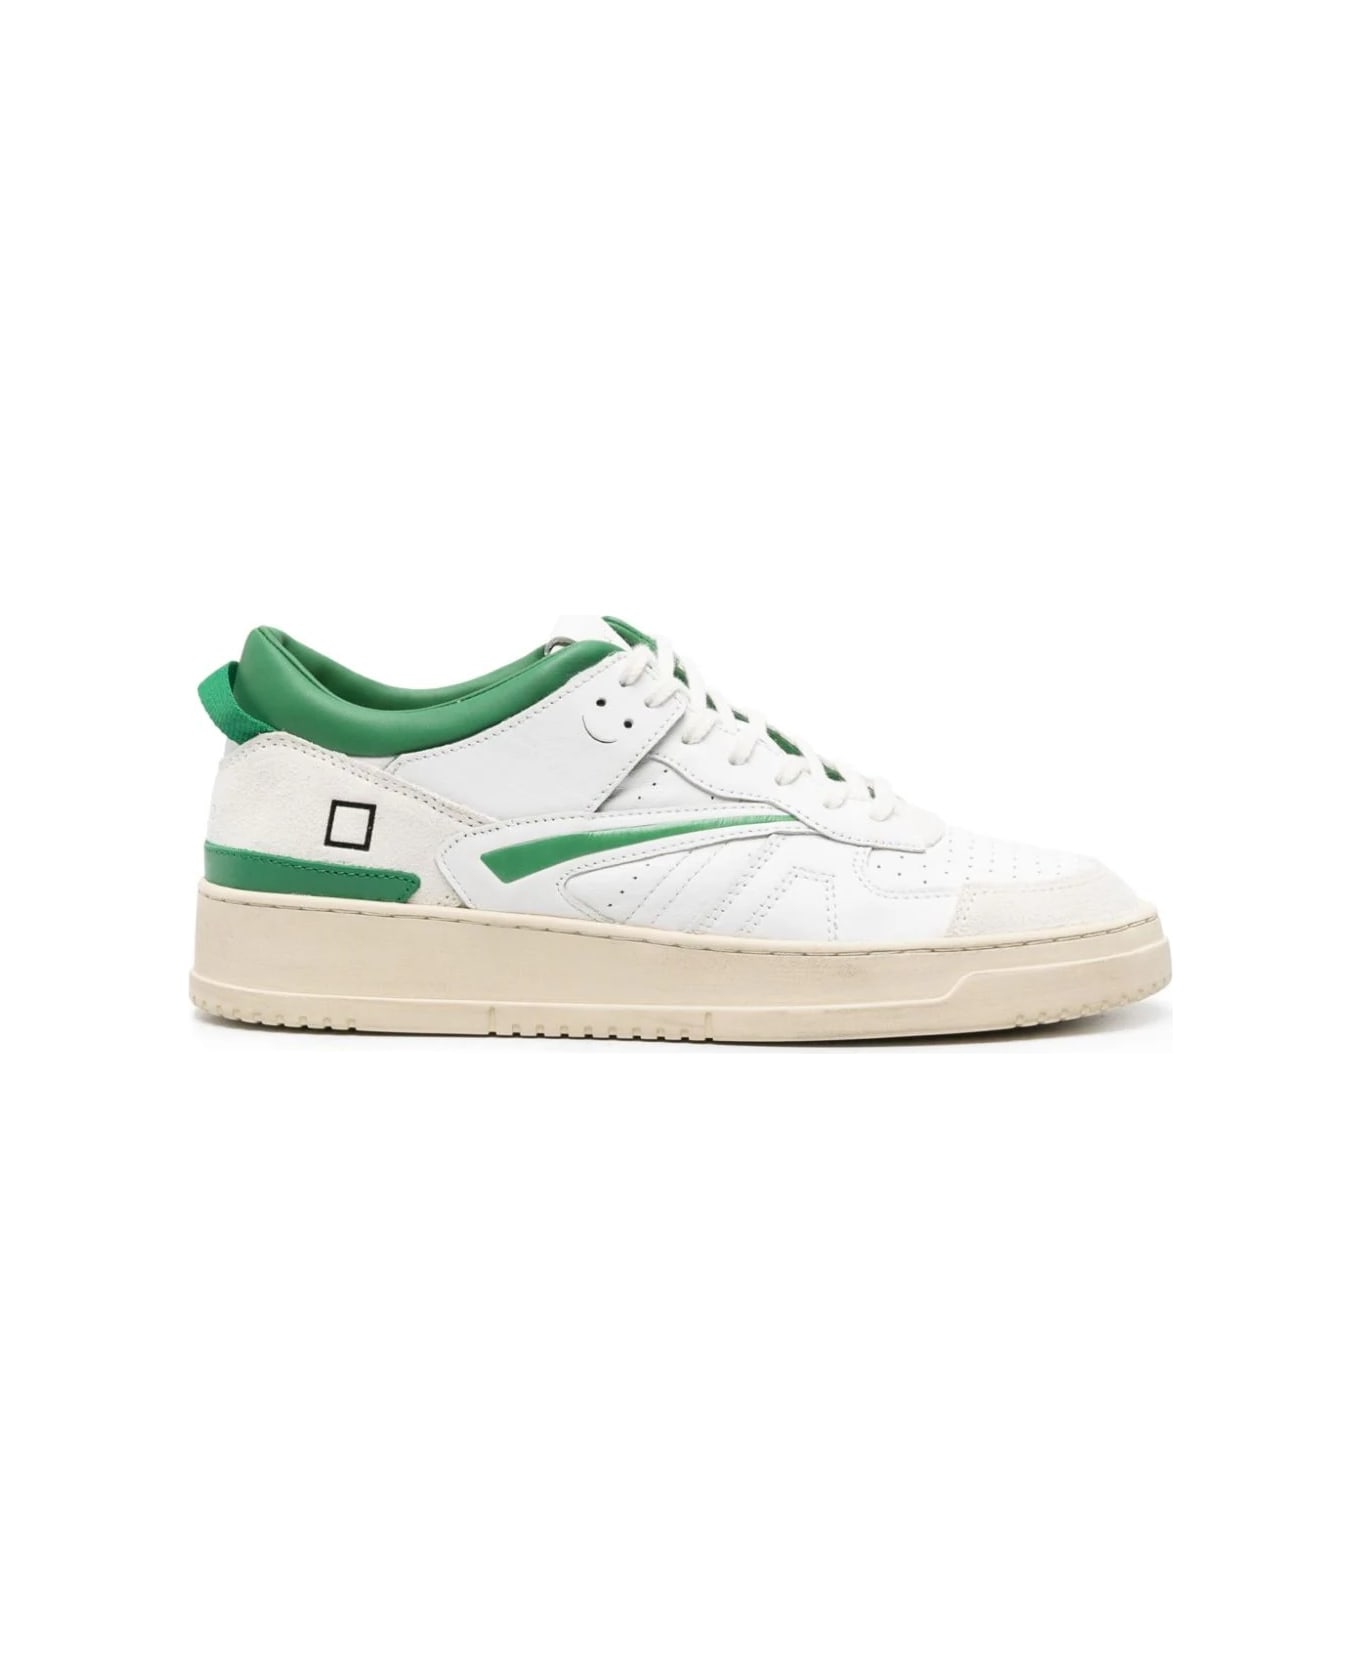 D.A.T.E. White And Green Torneo Sneakers - Green スニーカー